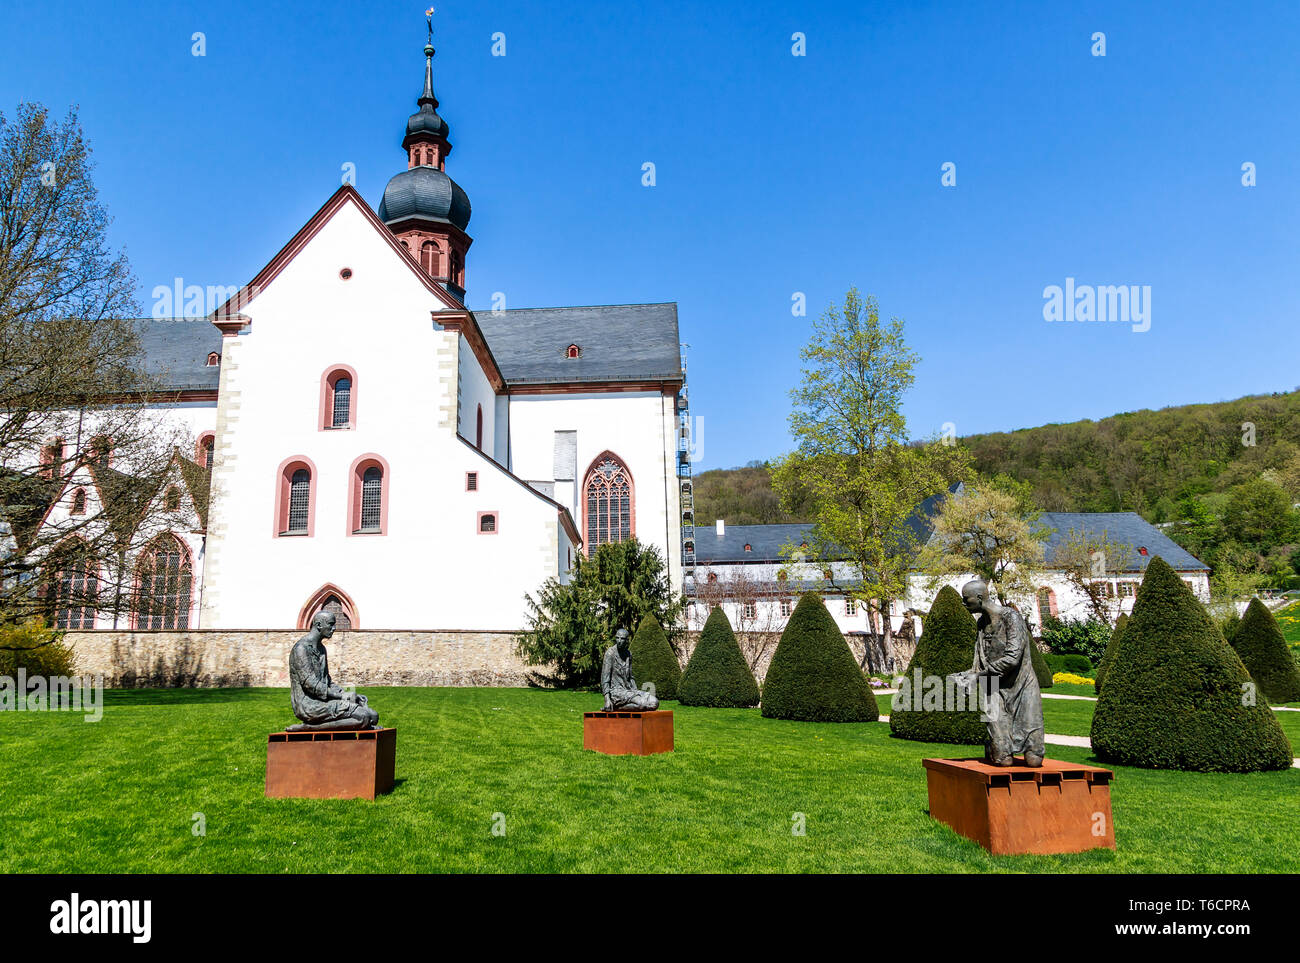 Historic Eberbach Abbey, Mystic heritage of the Cistercian monks in Rheingau, filming location for the movie The Name of the Rose, Hesse, Germany Stock Photo